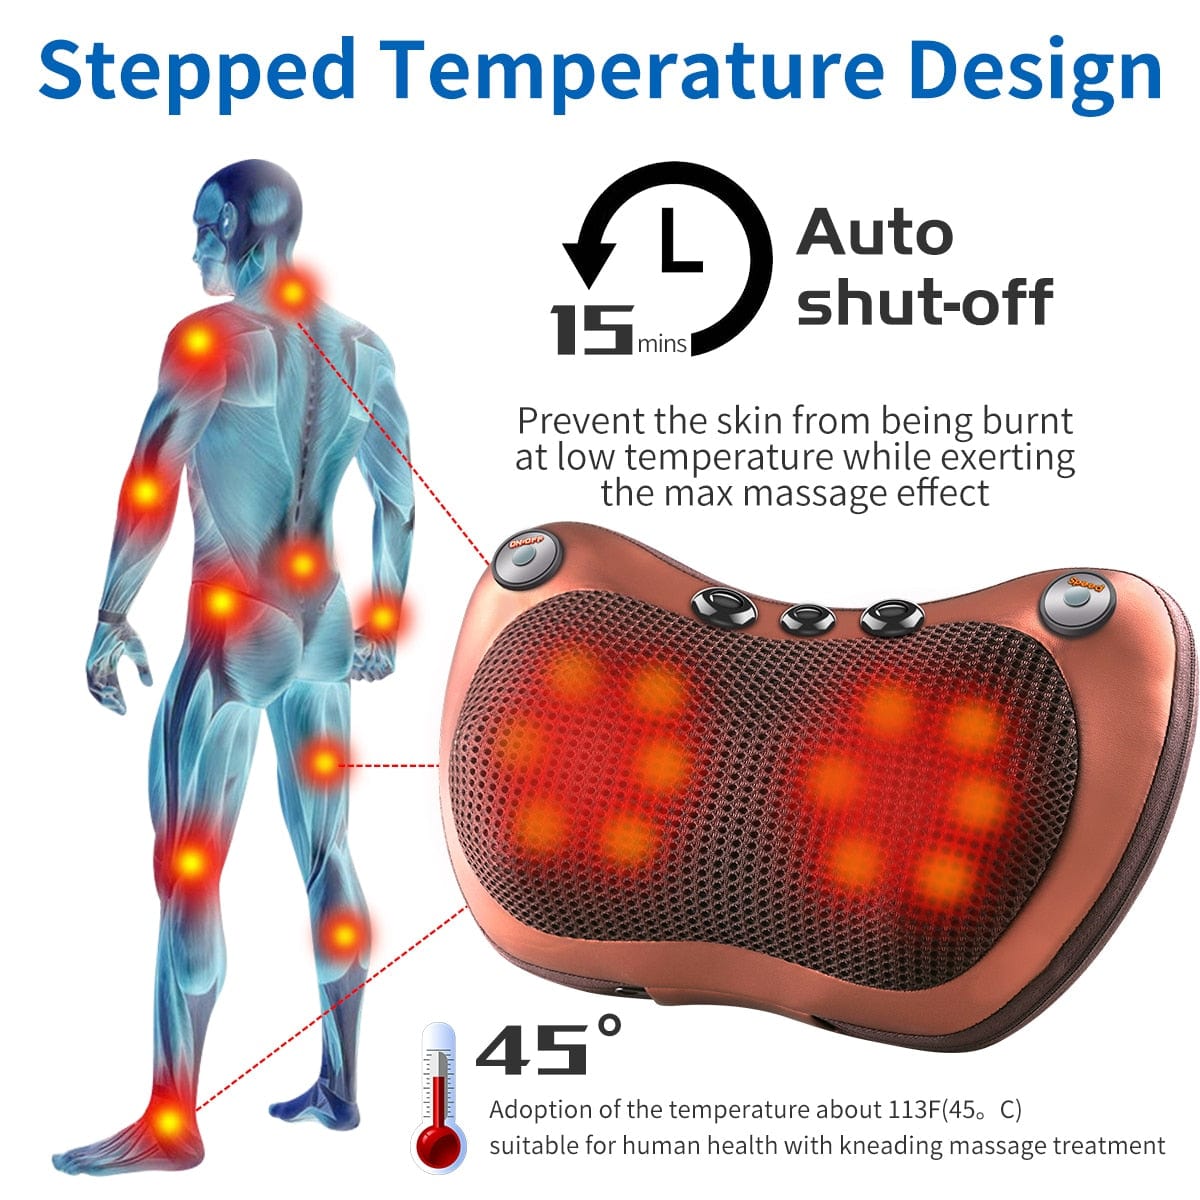 "Multifunctional Electric Massage Pillow Cushion for Head, Neck, Back, Waist, and Body - Ideal for Car and Home Use" - Comfortable Neck and Body Massager online | Shop Now!